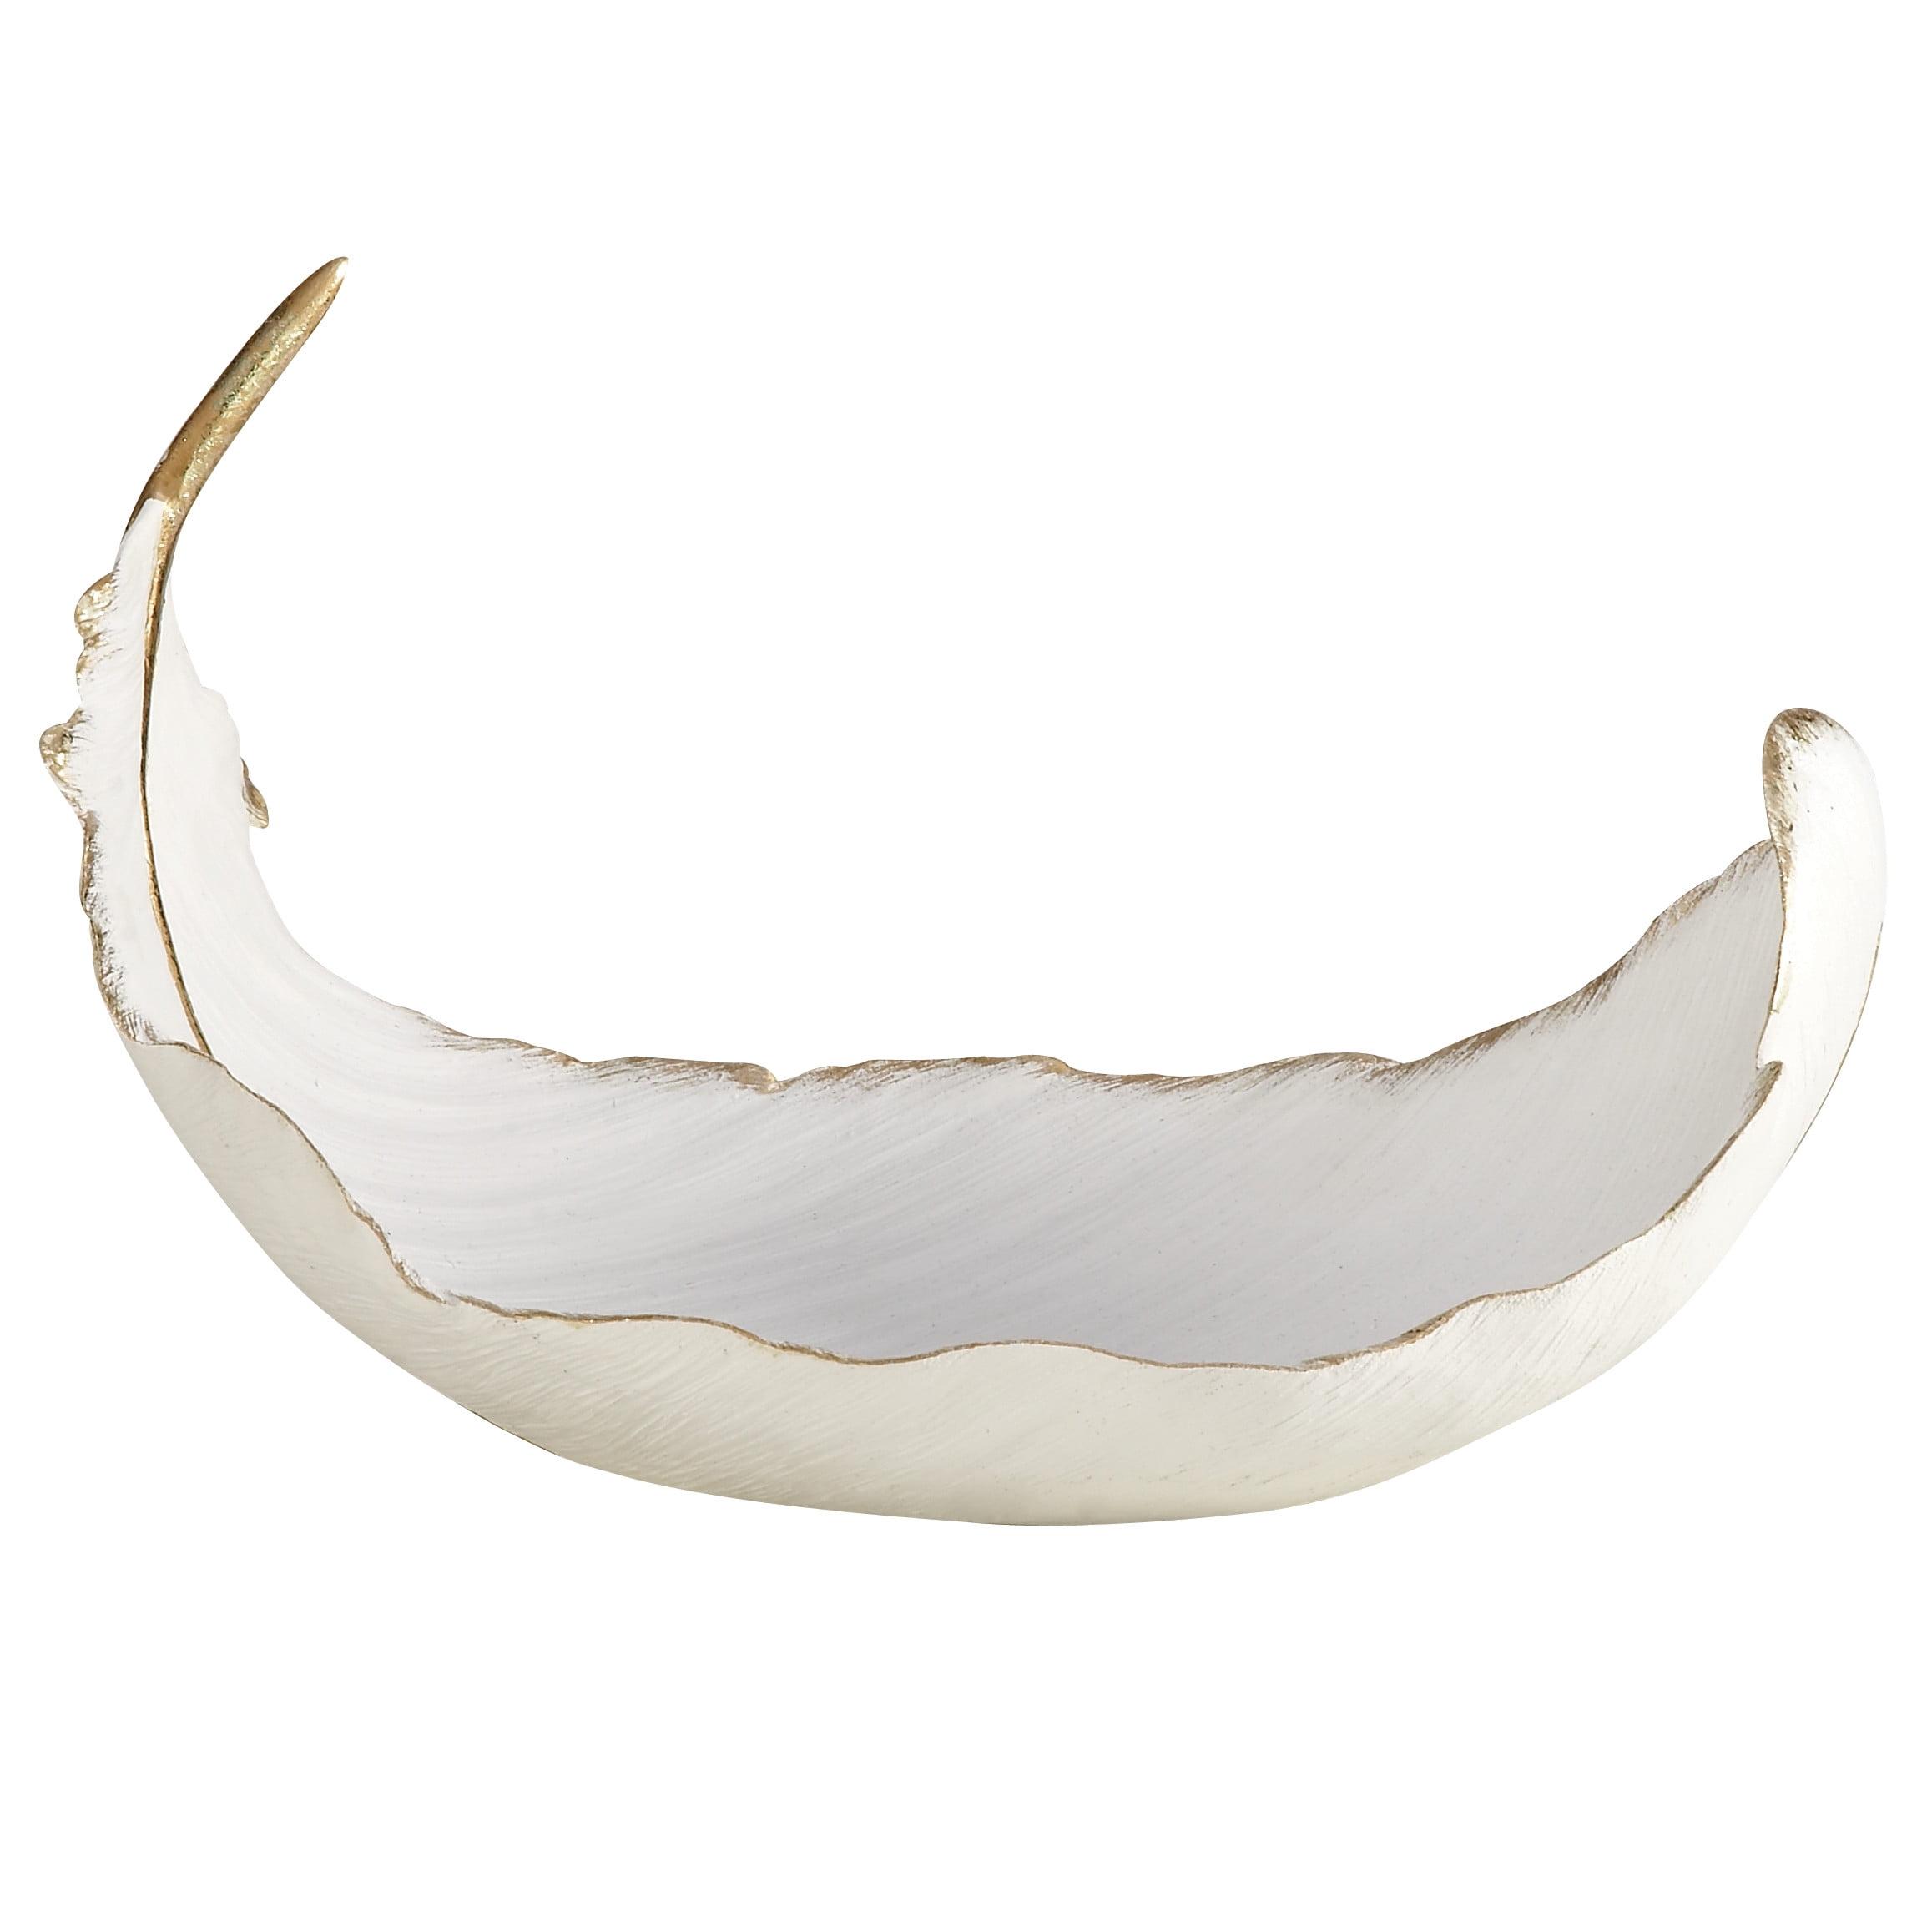 Elegant Oval White and Gold Polystone Feather Decorative Bowl